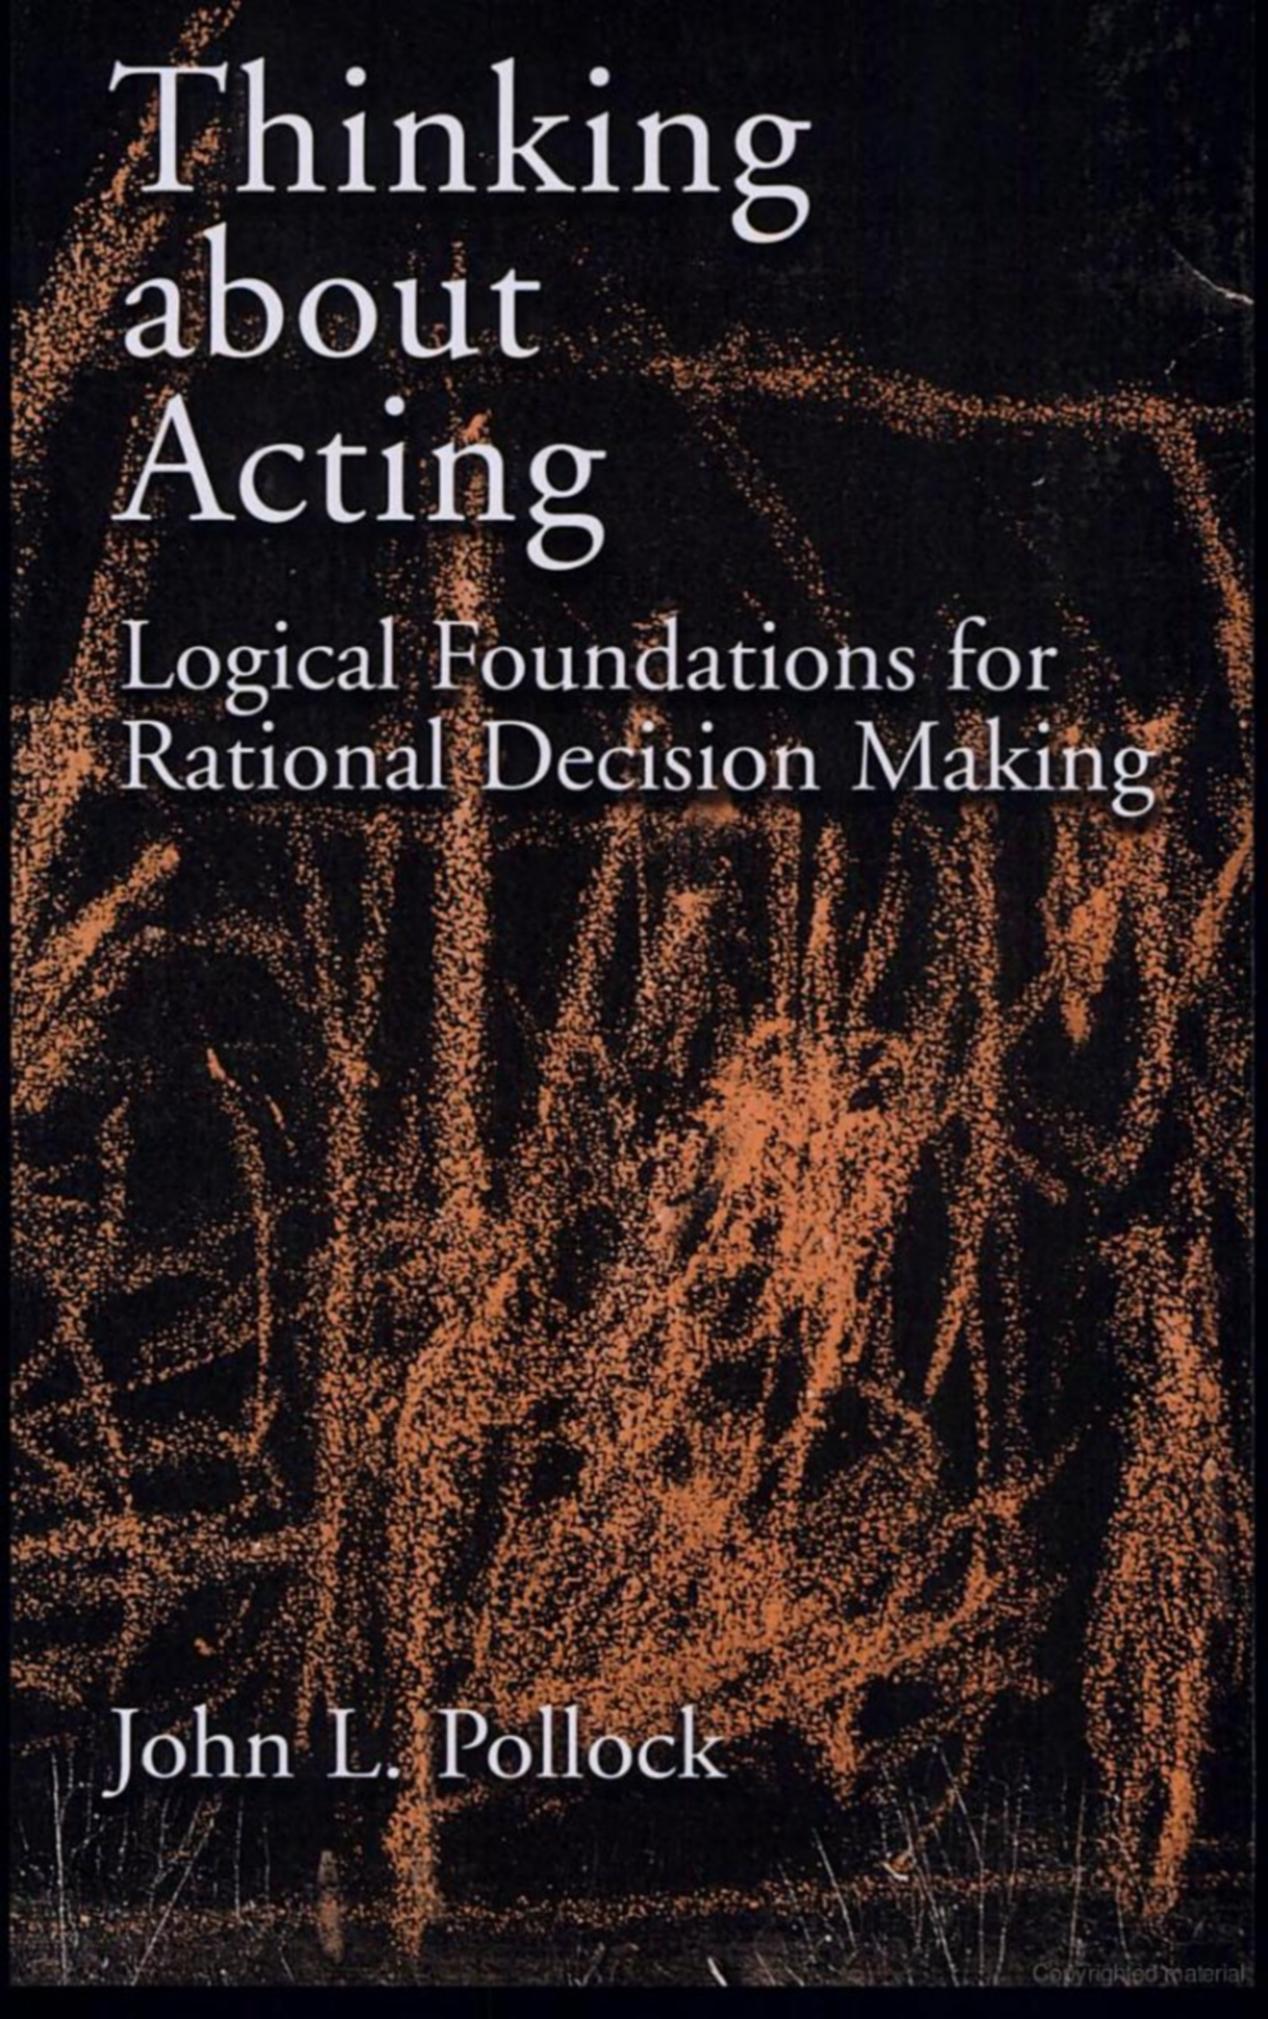 Thinking About Acting: Logical Foundations for Rational Decision Making